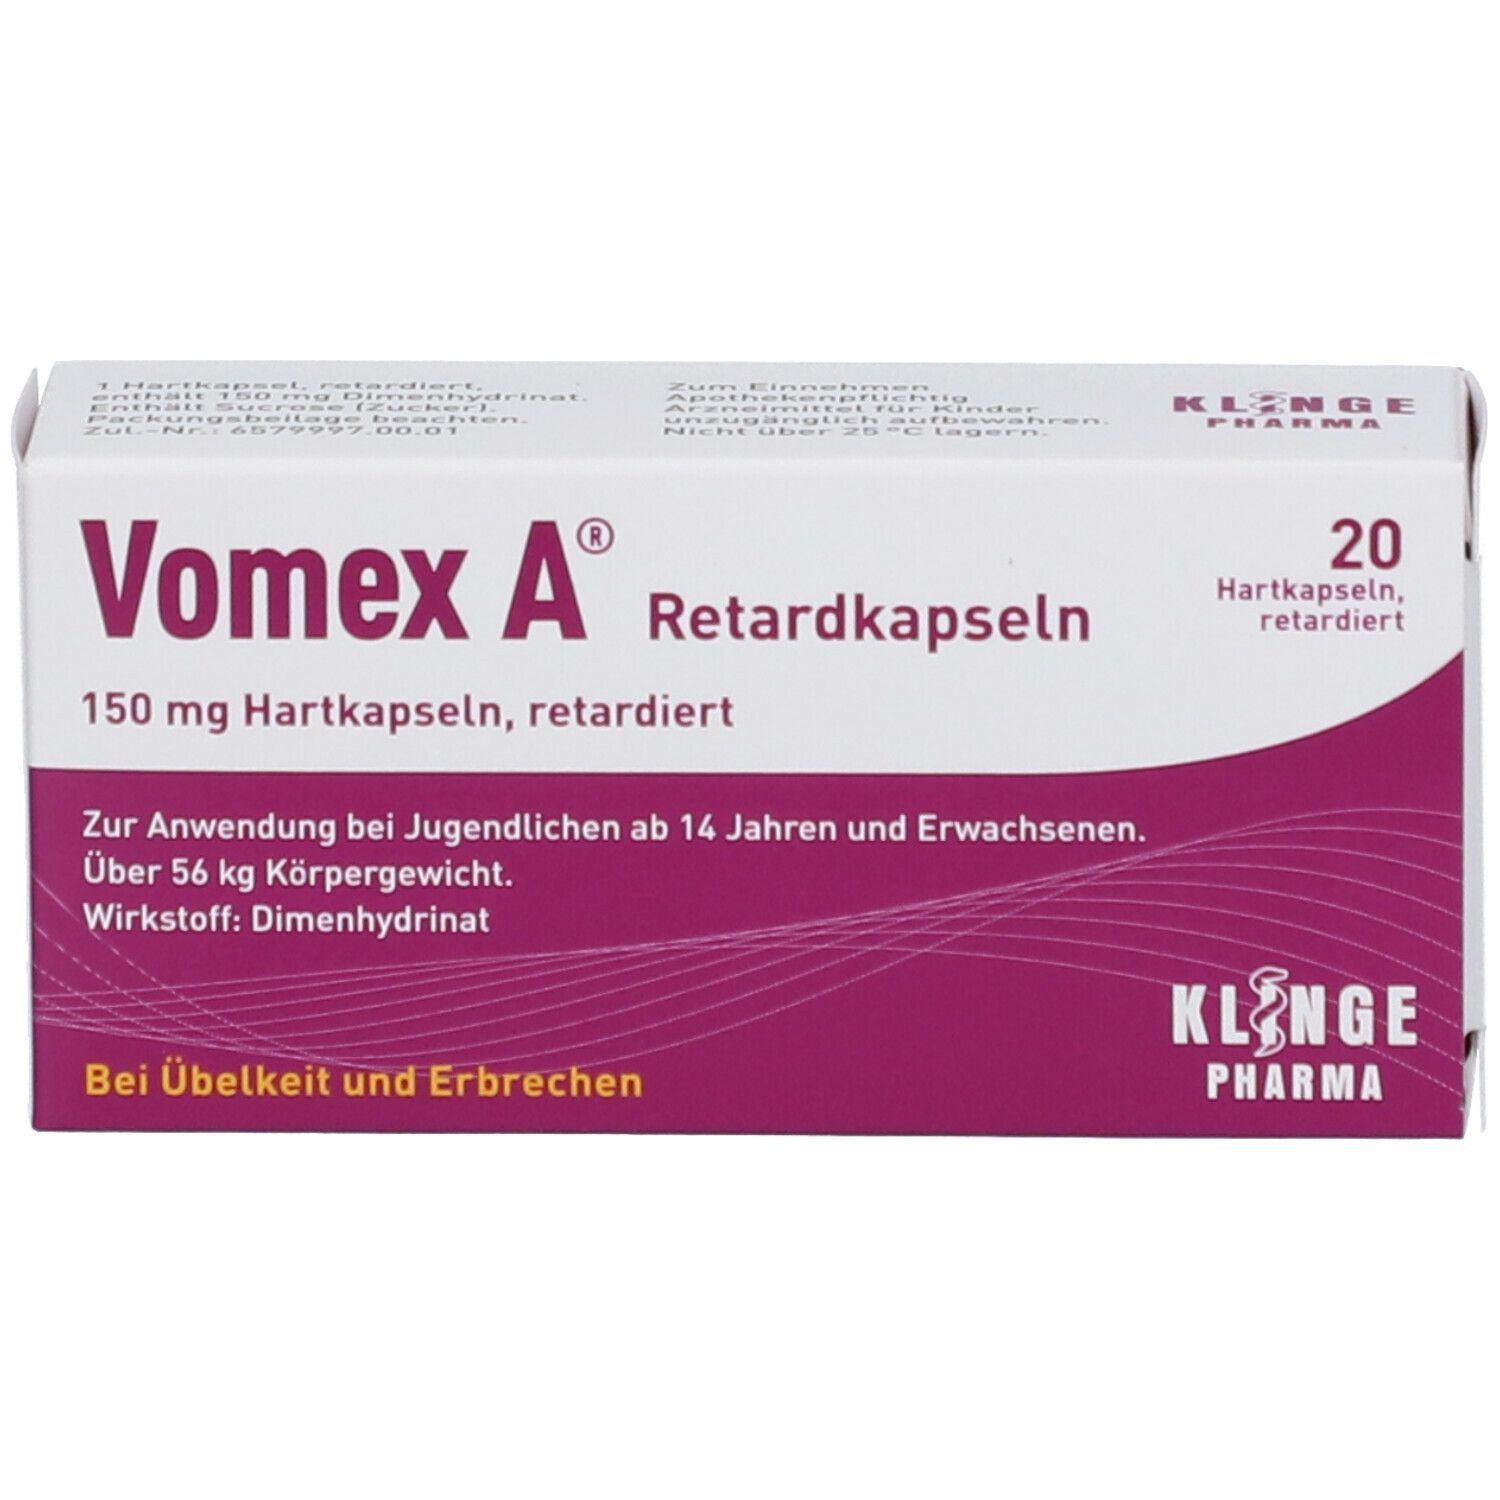 Vomex A® 150 mg